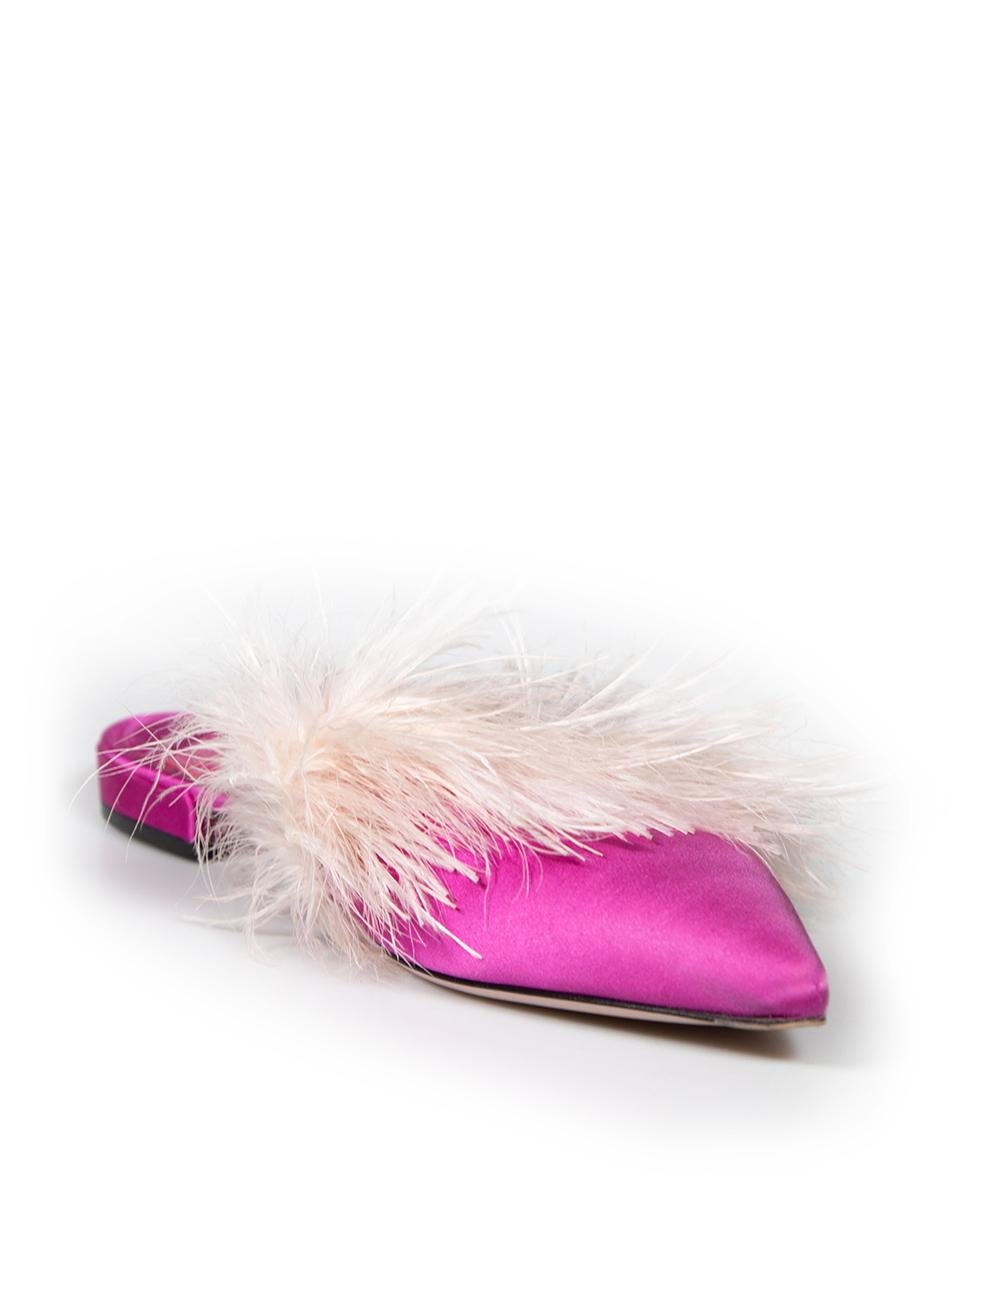 CONDITION is Very good. Minimal wear to mules is evident. Minimal wear to both shoe tip where abrasion is seen on this used Prada designer resale item.
 
 
 
 Details
 
 
 Pink
 
 Cloth
 
 Mules
 
 Point toe
 
 Feather trim
 
 
 
 
 
 Made in Italy
